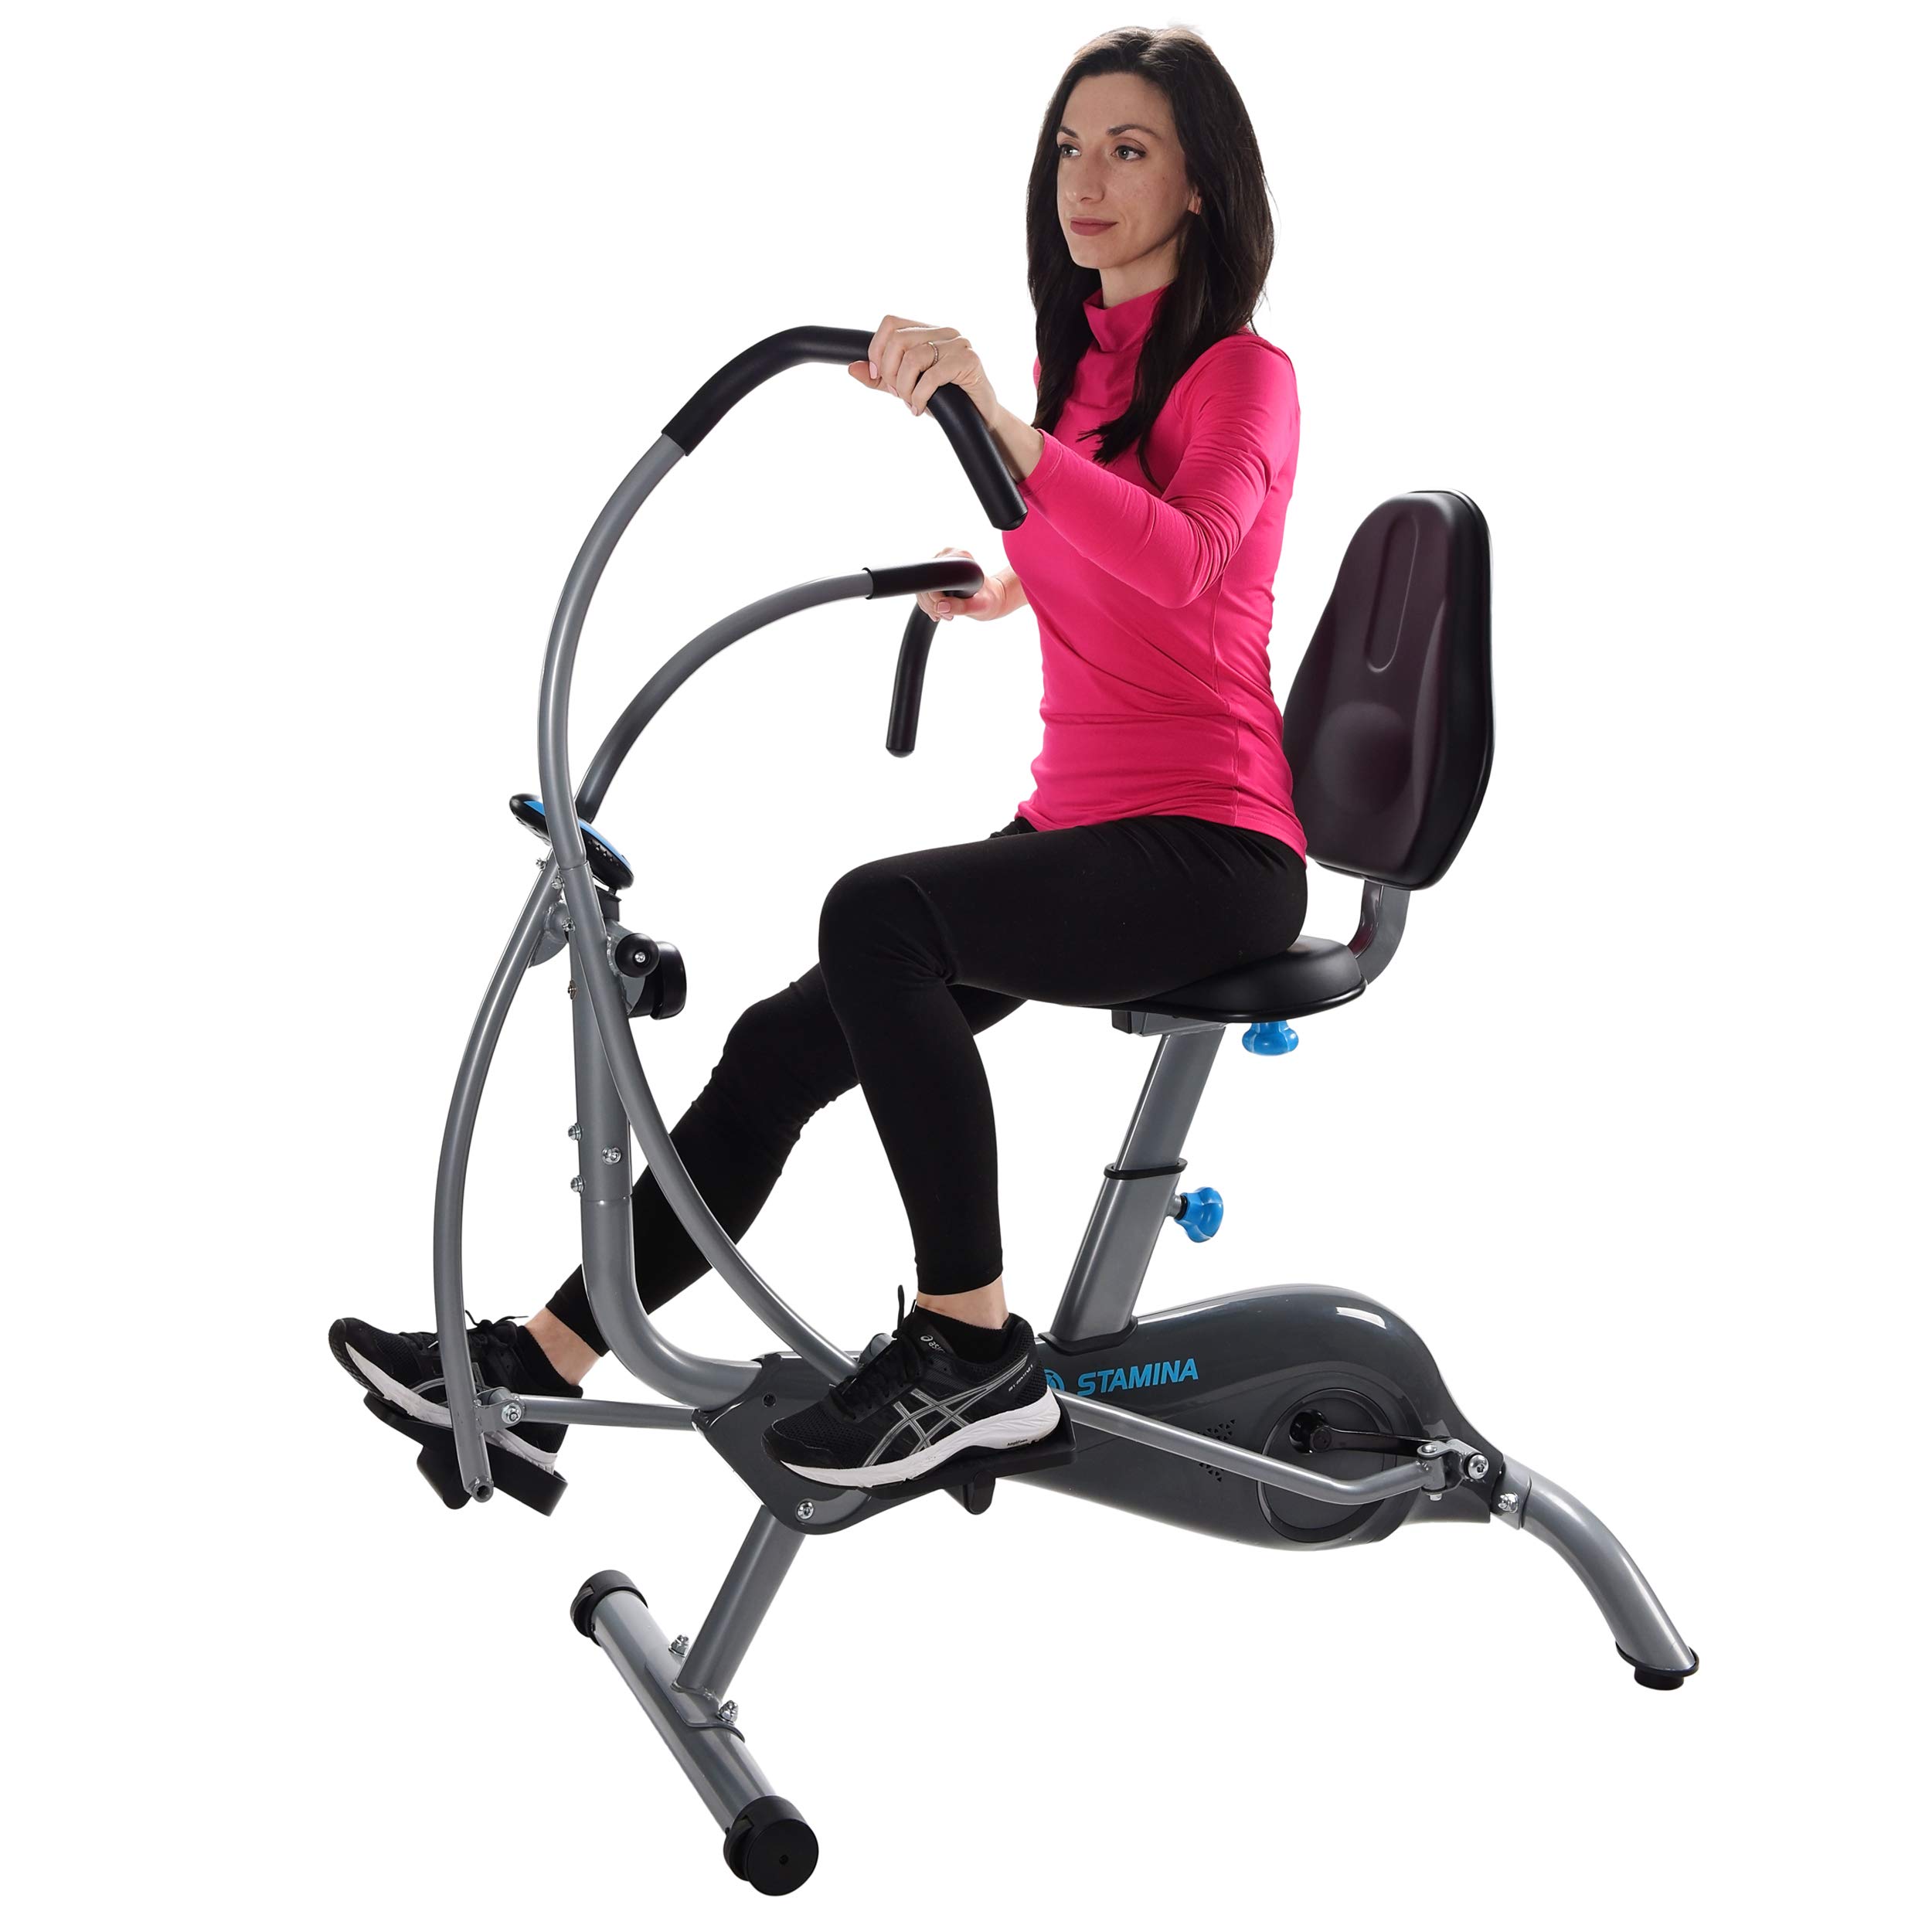 Stamina EasyStep Recumbent Stepper w Arm Exerciser - Smart Workout App - Seated cross Trainer Full Body Exercise Machine